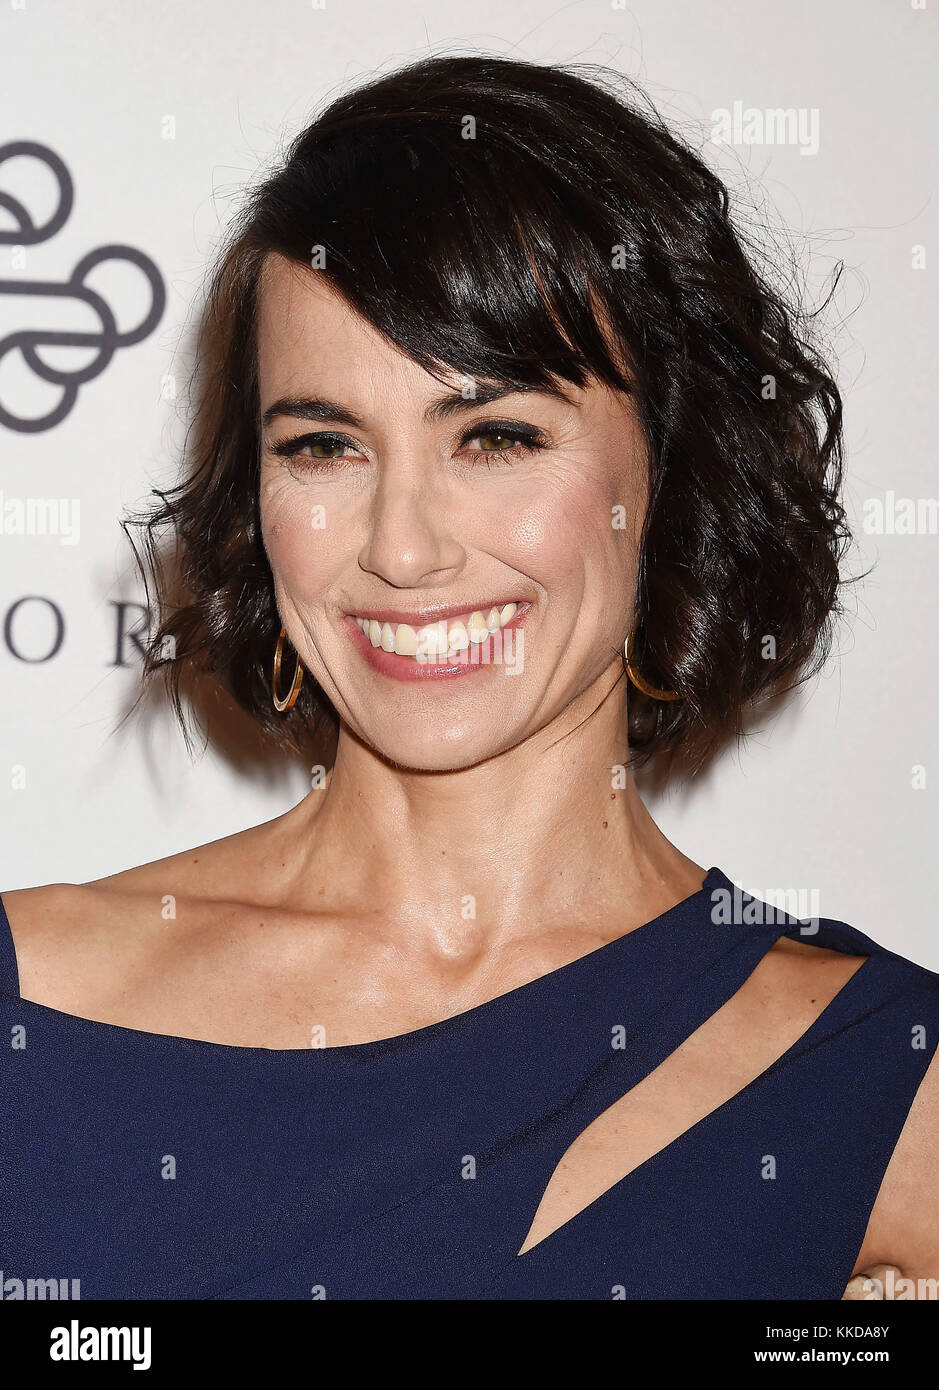 CONSTANCE ZIMMER US film actress arrives at the Variety's Power Of Women: Los Angeles at the Beverly Wilshire Four Seasons Hotel on October 13, 2017 in Beverly Hills, California. Photo: Jeffrey Mayer Stock Photo